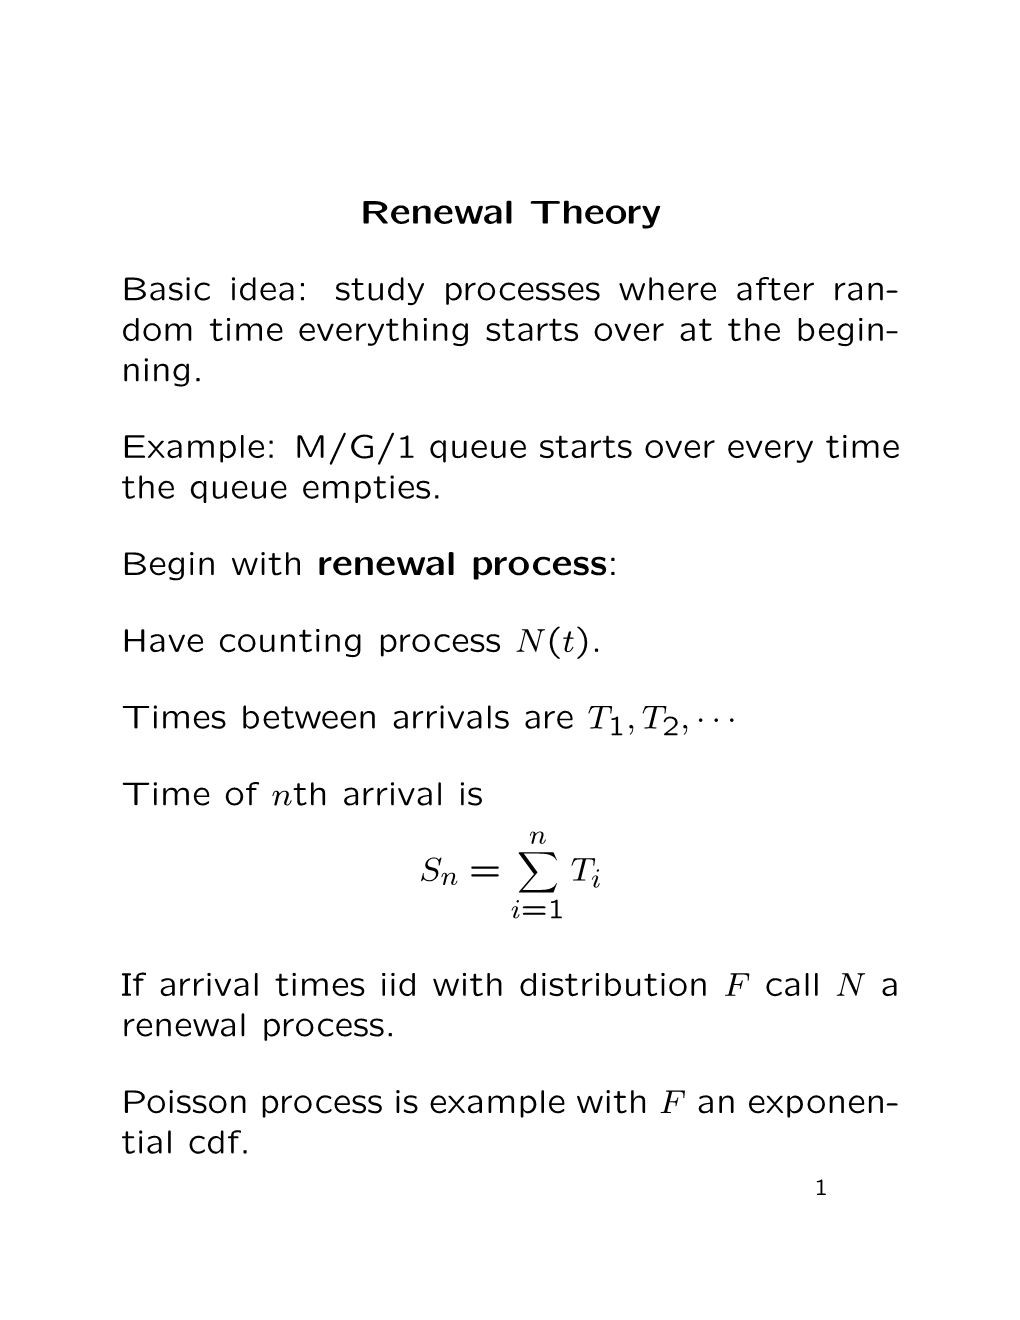 Renewal Theory Basic Idea: Study Processes Where After Ran- Dom